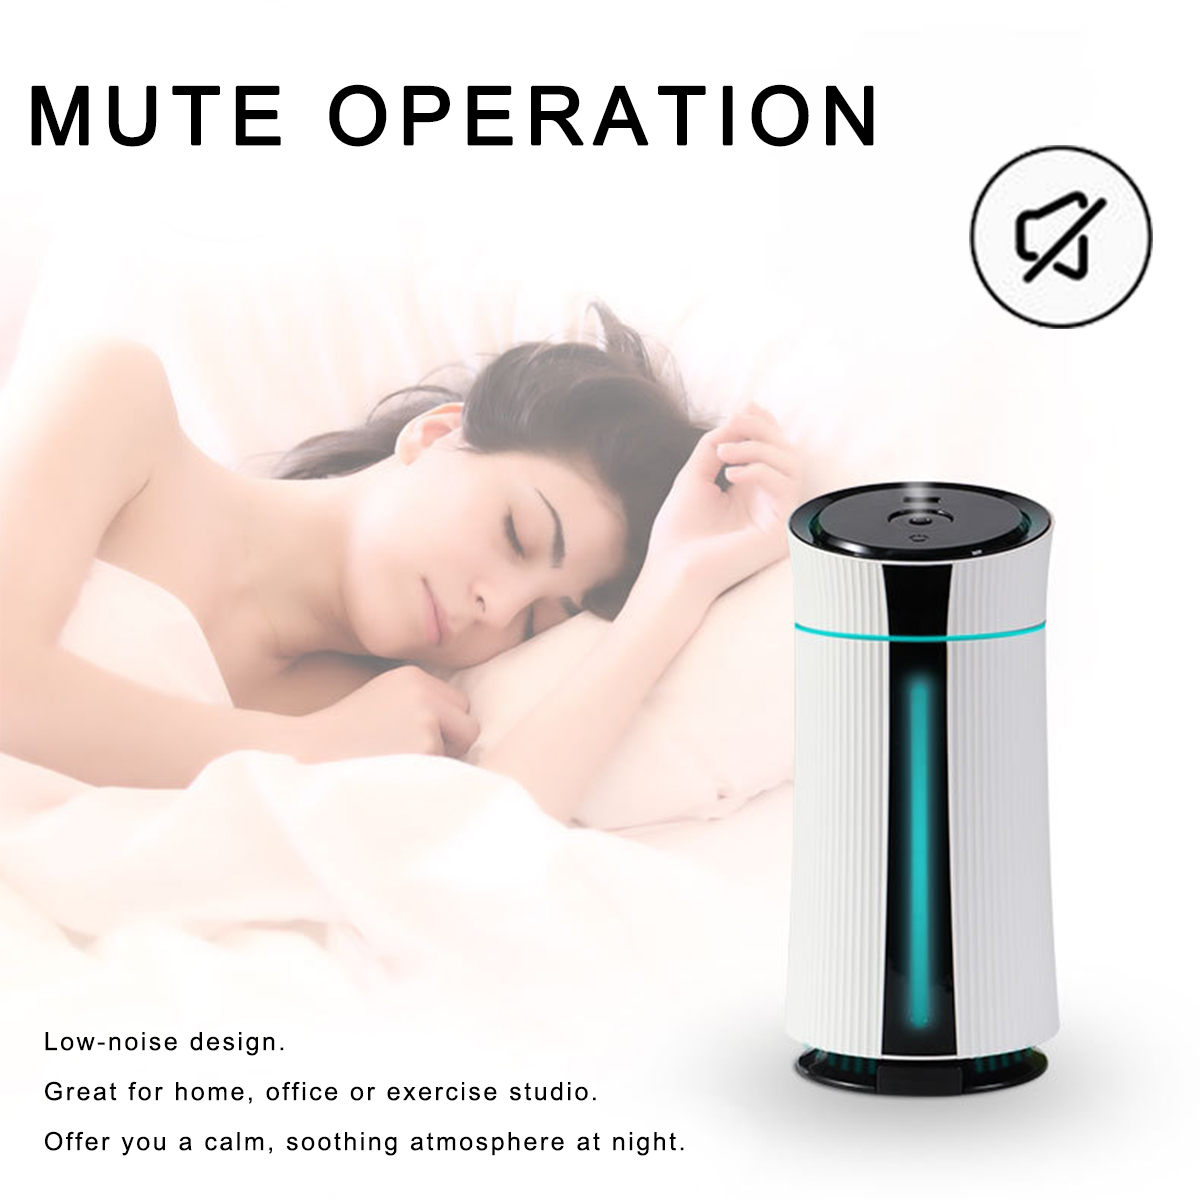 Portable-USB-Humidifier-2-Gear-Spray-Mode-Air-Diffuser-Purifier-Cool-Mist-Colorful-LED-Night-Light-L-1835241-4